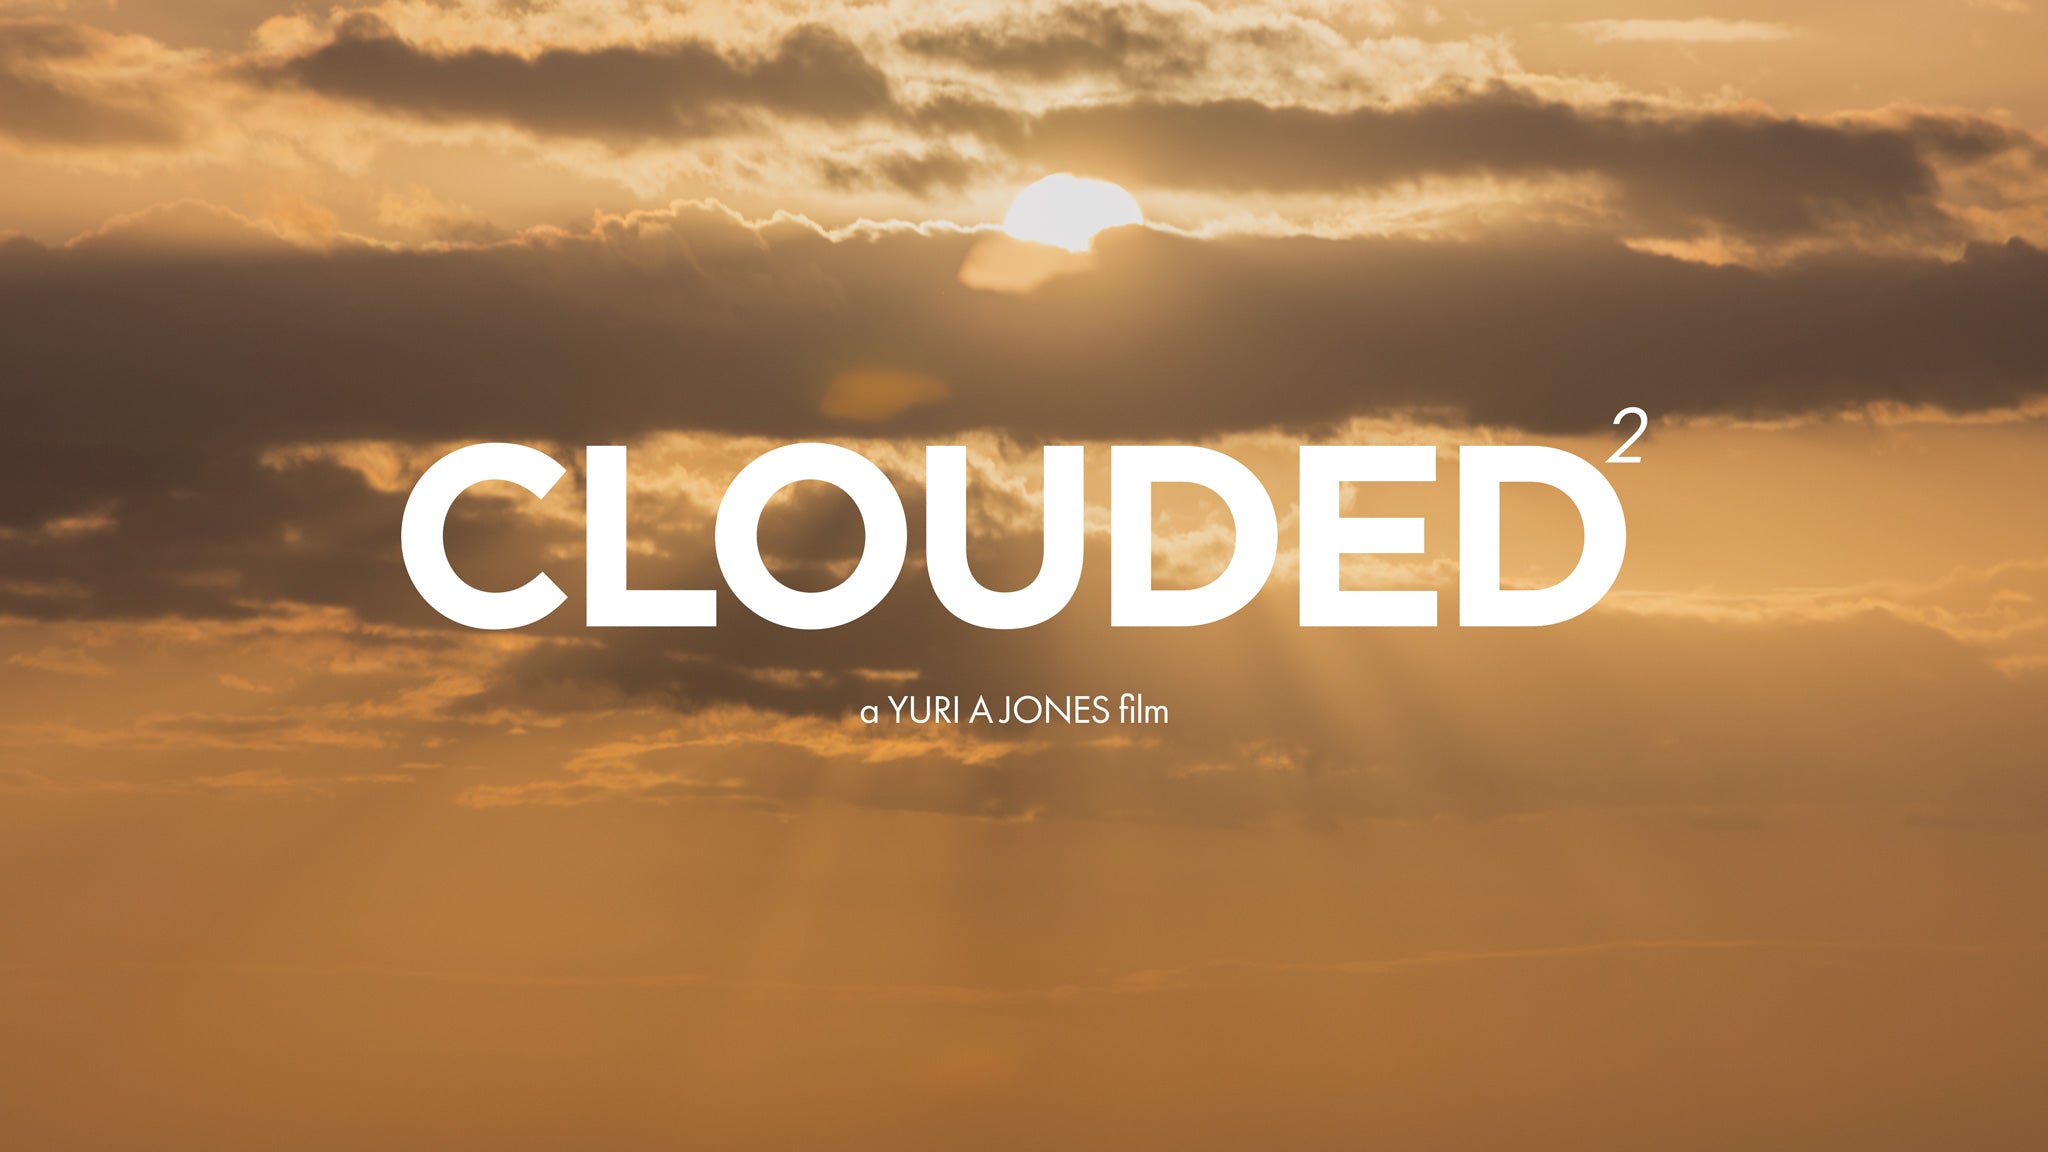 A new timelapse film - "CLOUDED II"